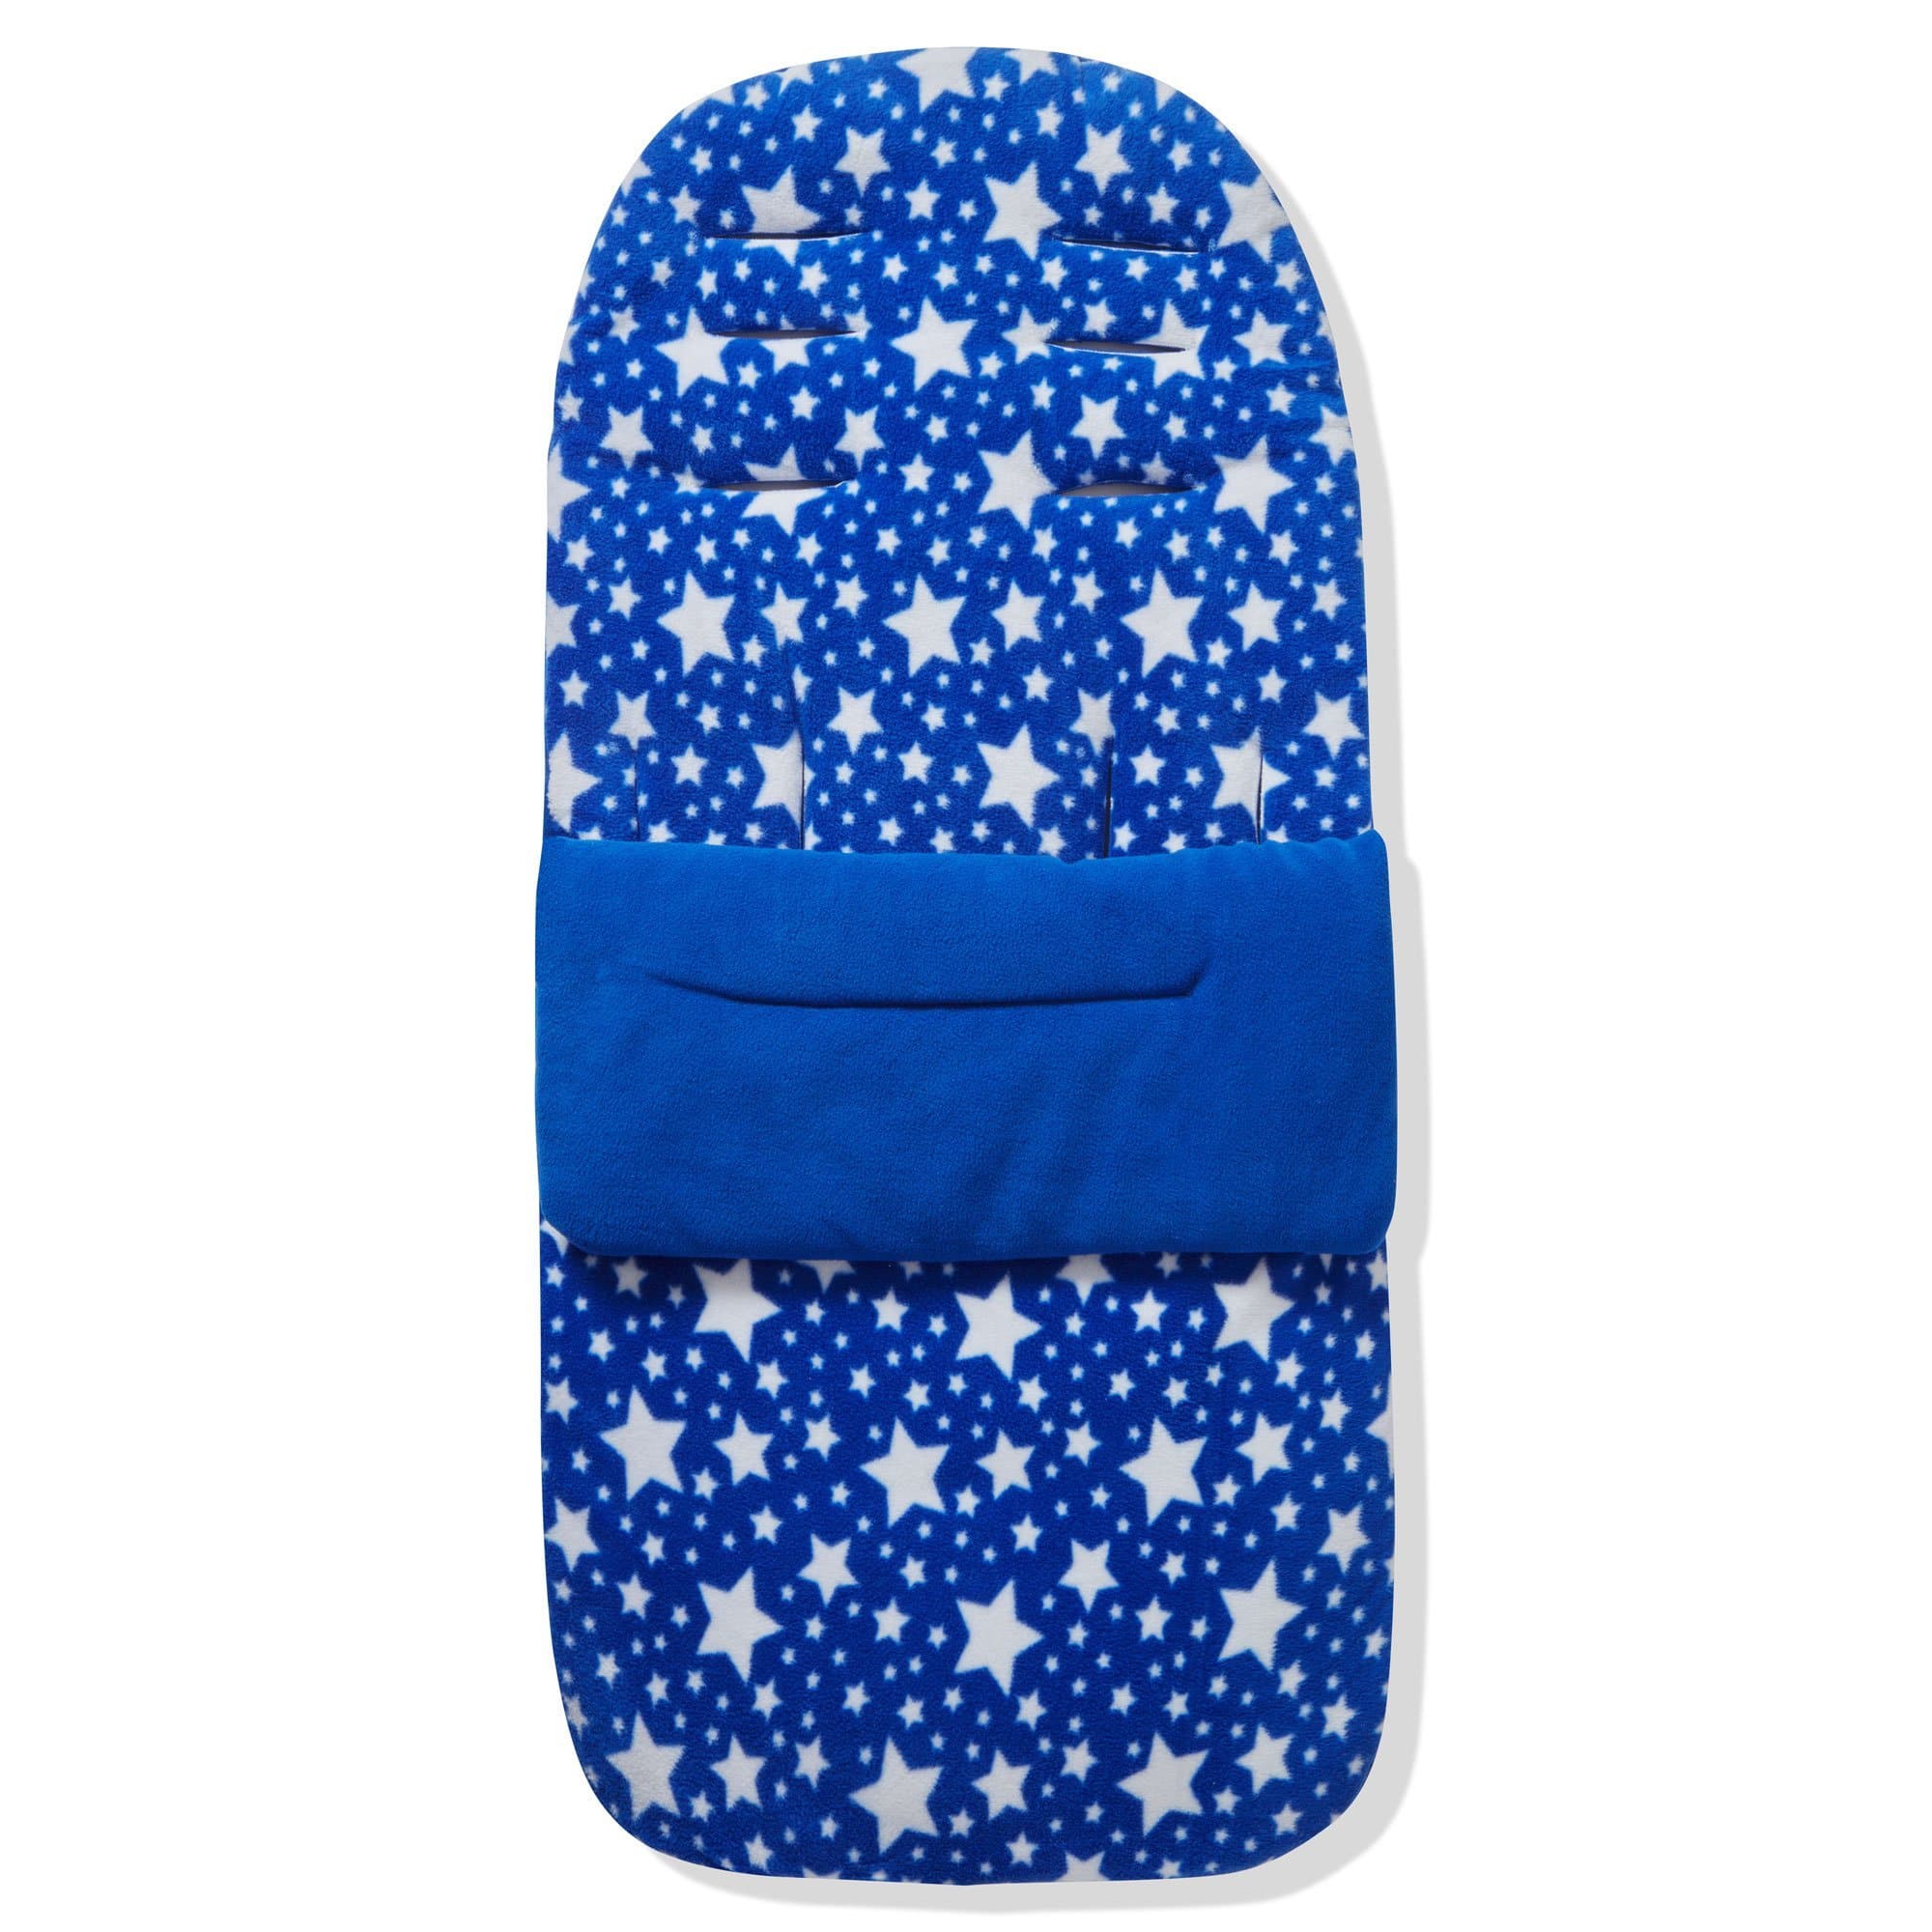 Fleece Footmuff / Cosy Toes Compatible with Red Castle - Blue Star / Fits All Models | For Your Little One